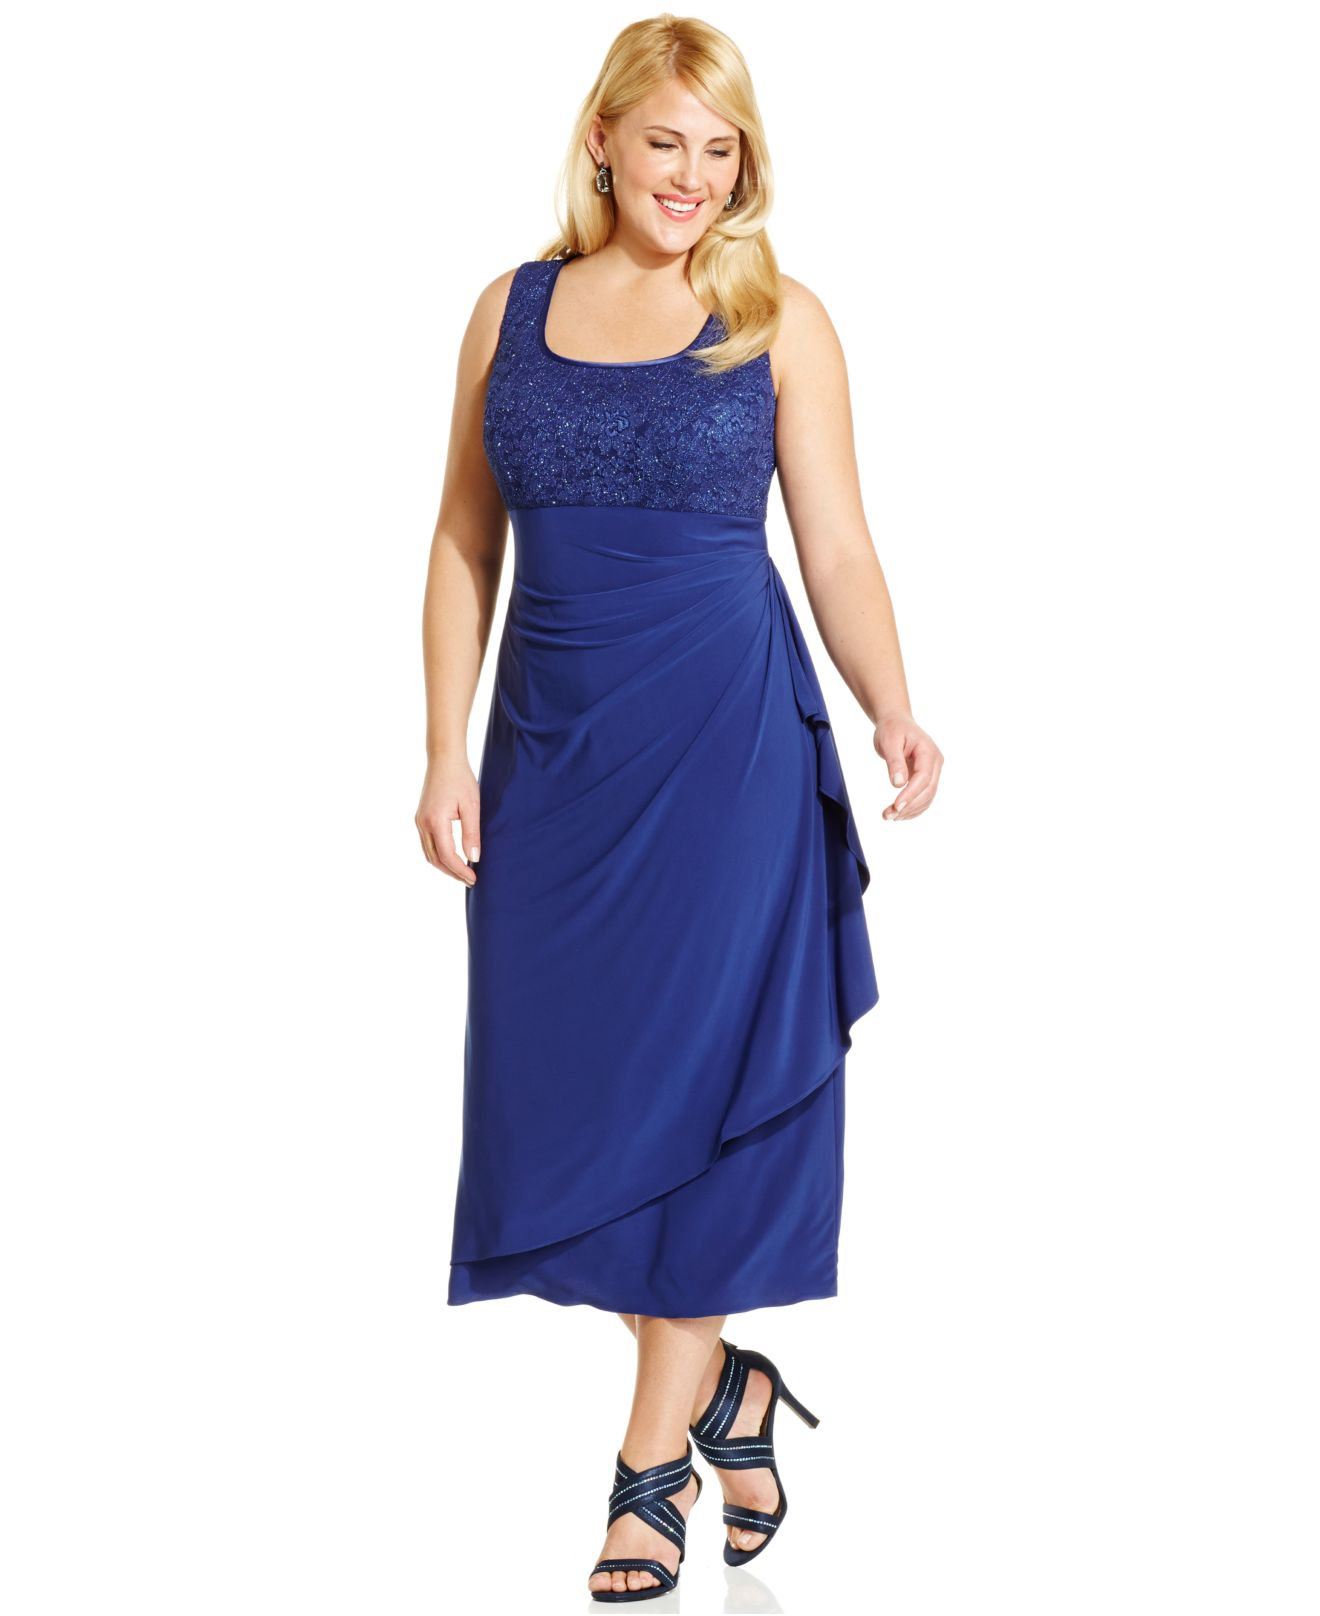 Lyst - Alex evenings Plus Size Lace A-line Dress And Jacket in Blue